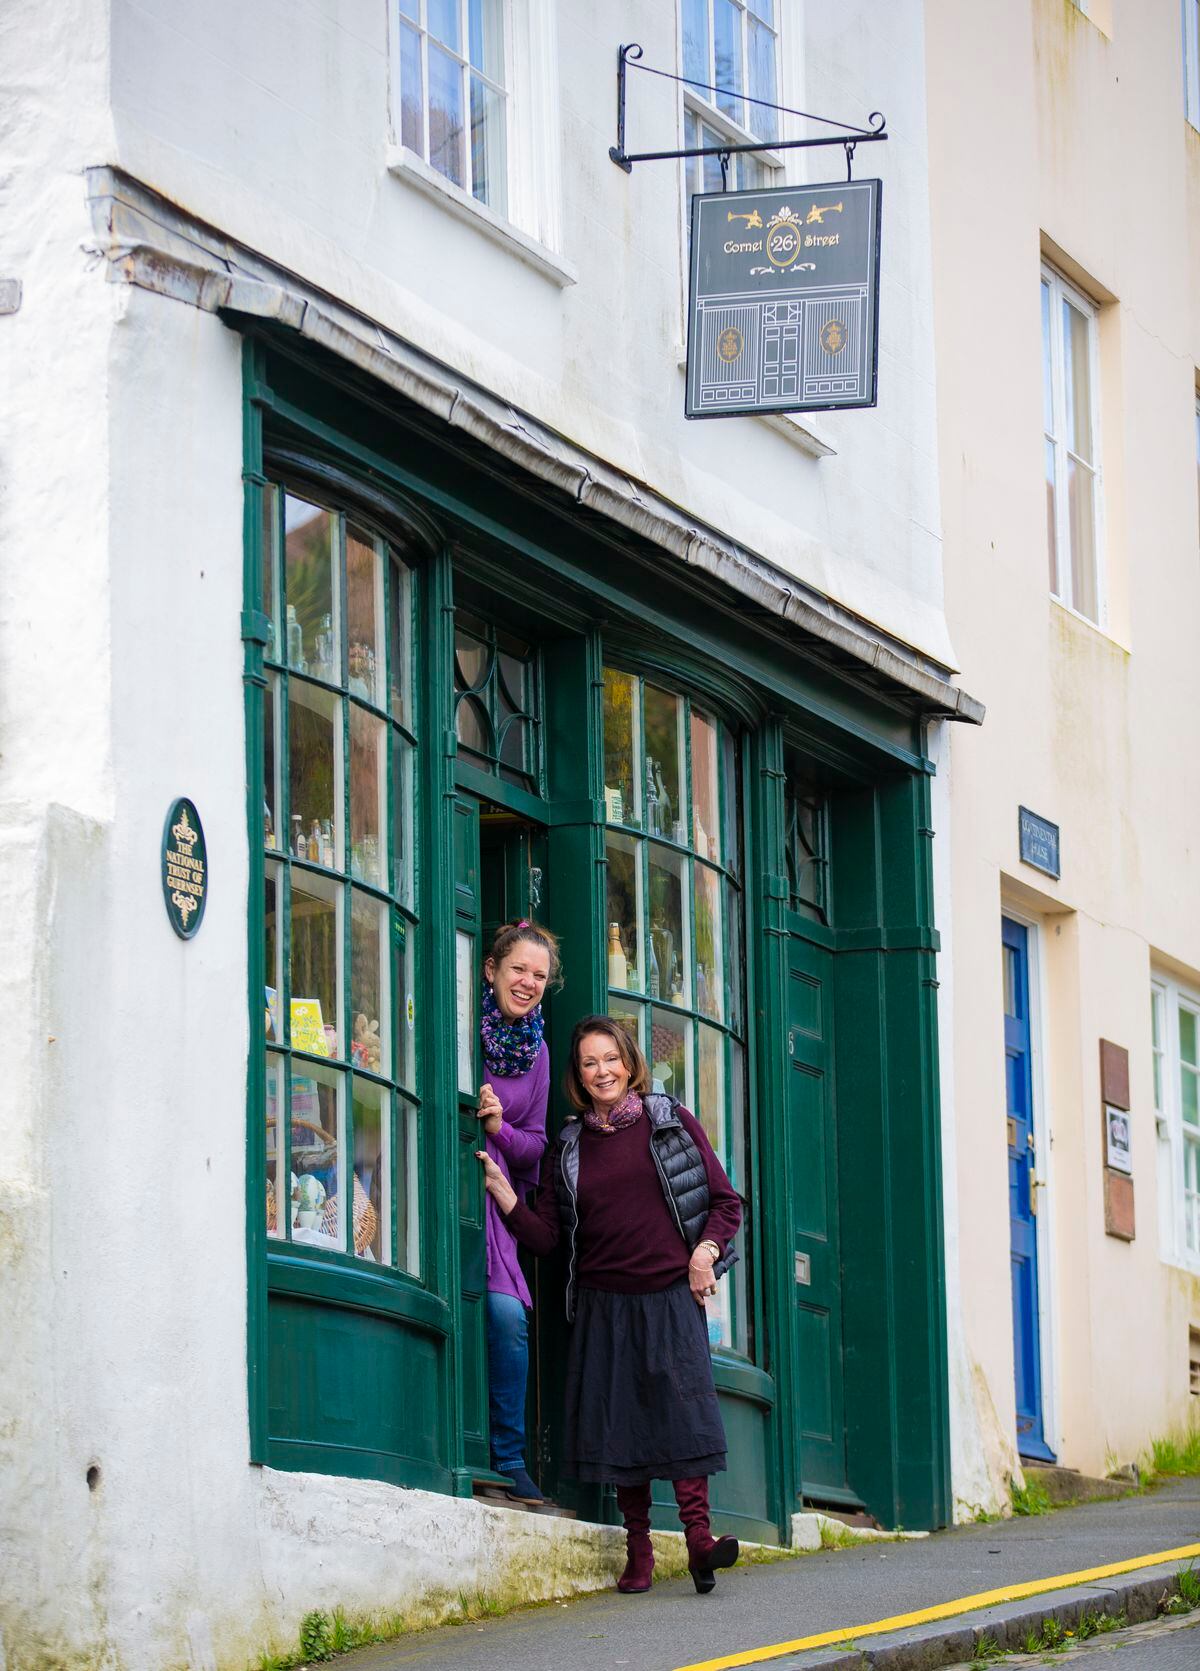 Picture By Peter Frankland. 27-03-23 The National Trust Victorian Shop in Cornet Street is opening for the summer season. L-R - Sara-Jane Lampitt and Caro Drake.. (31947712)